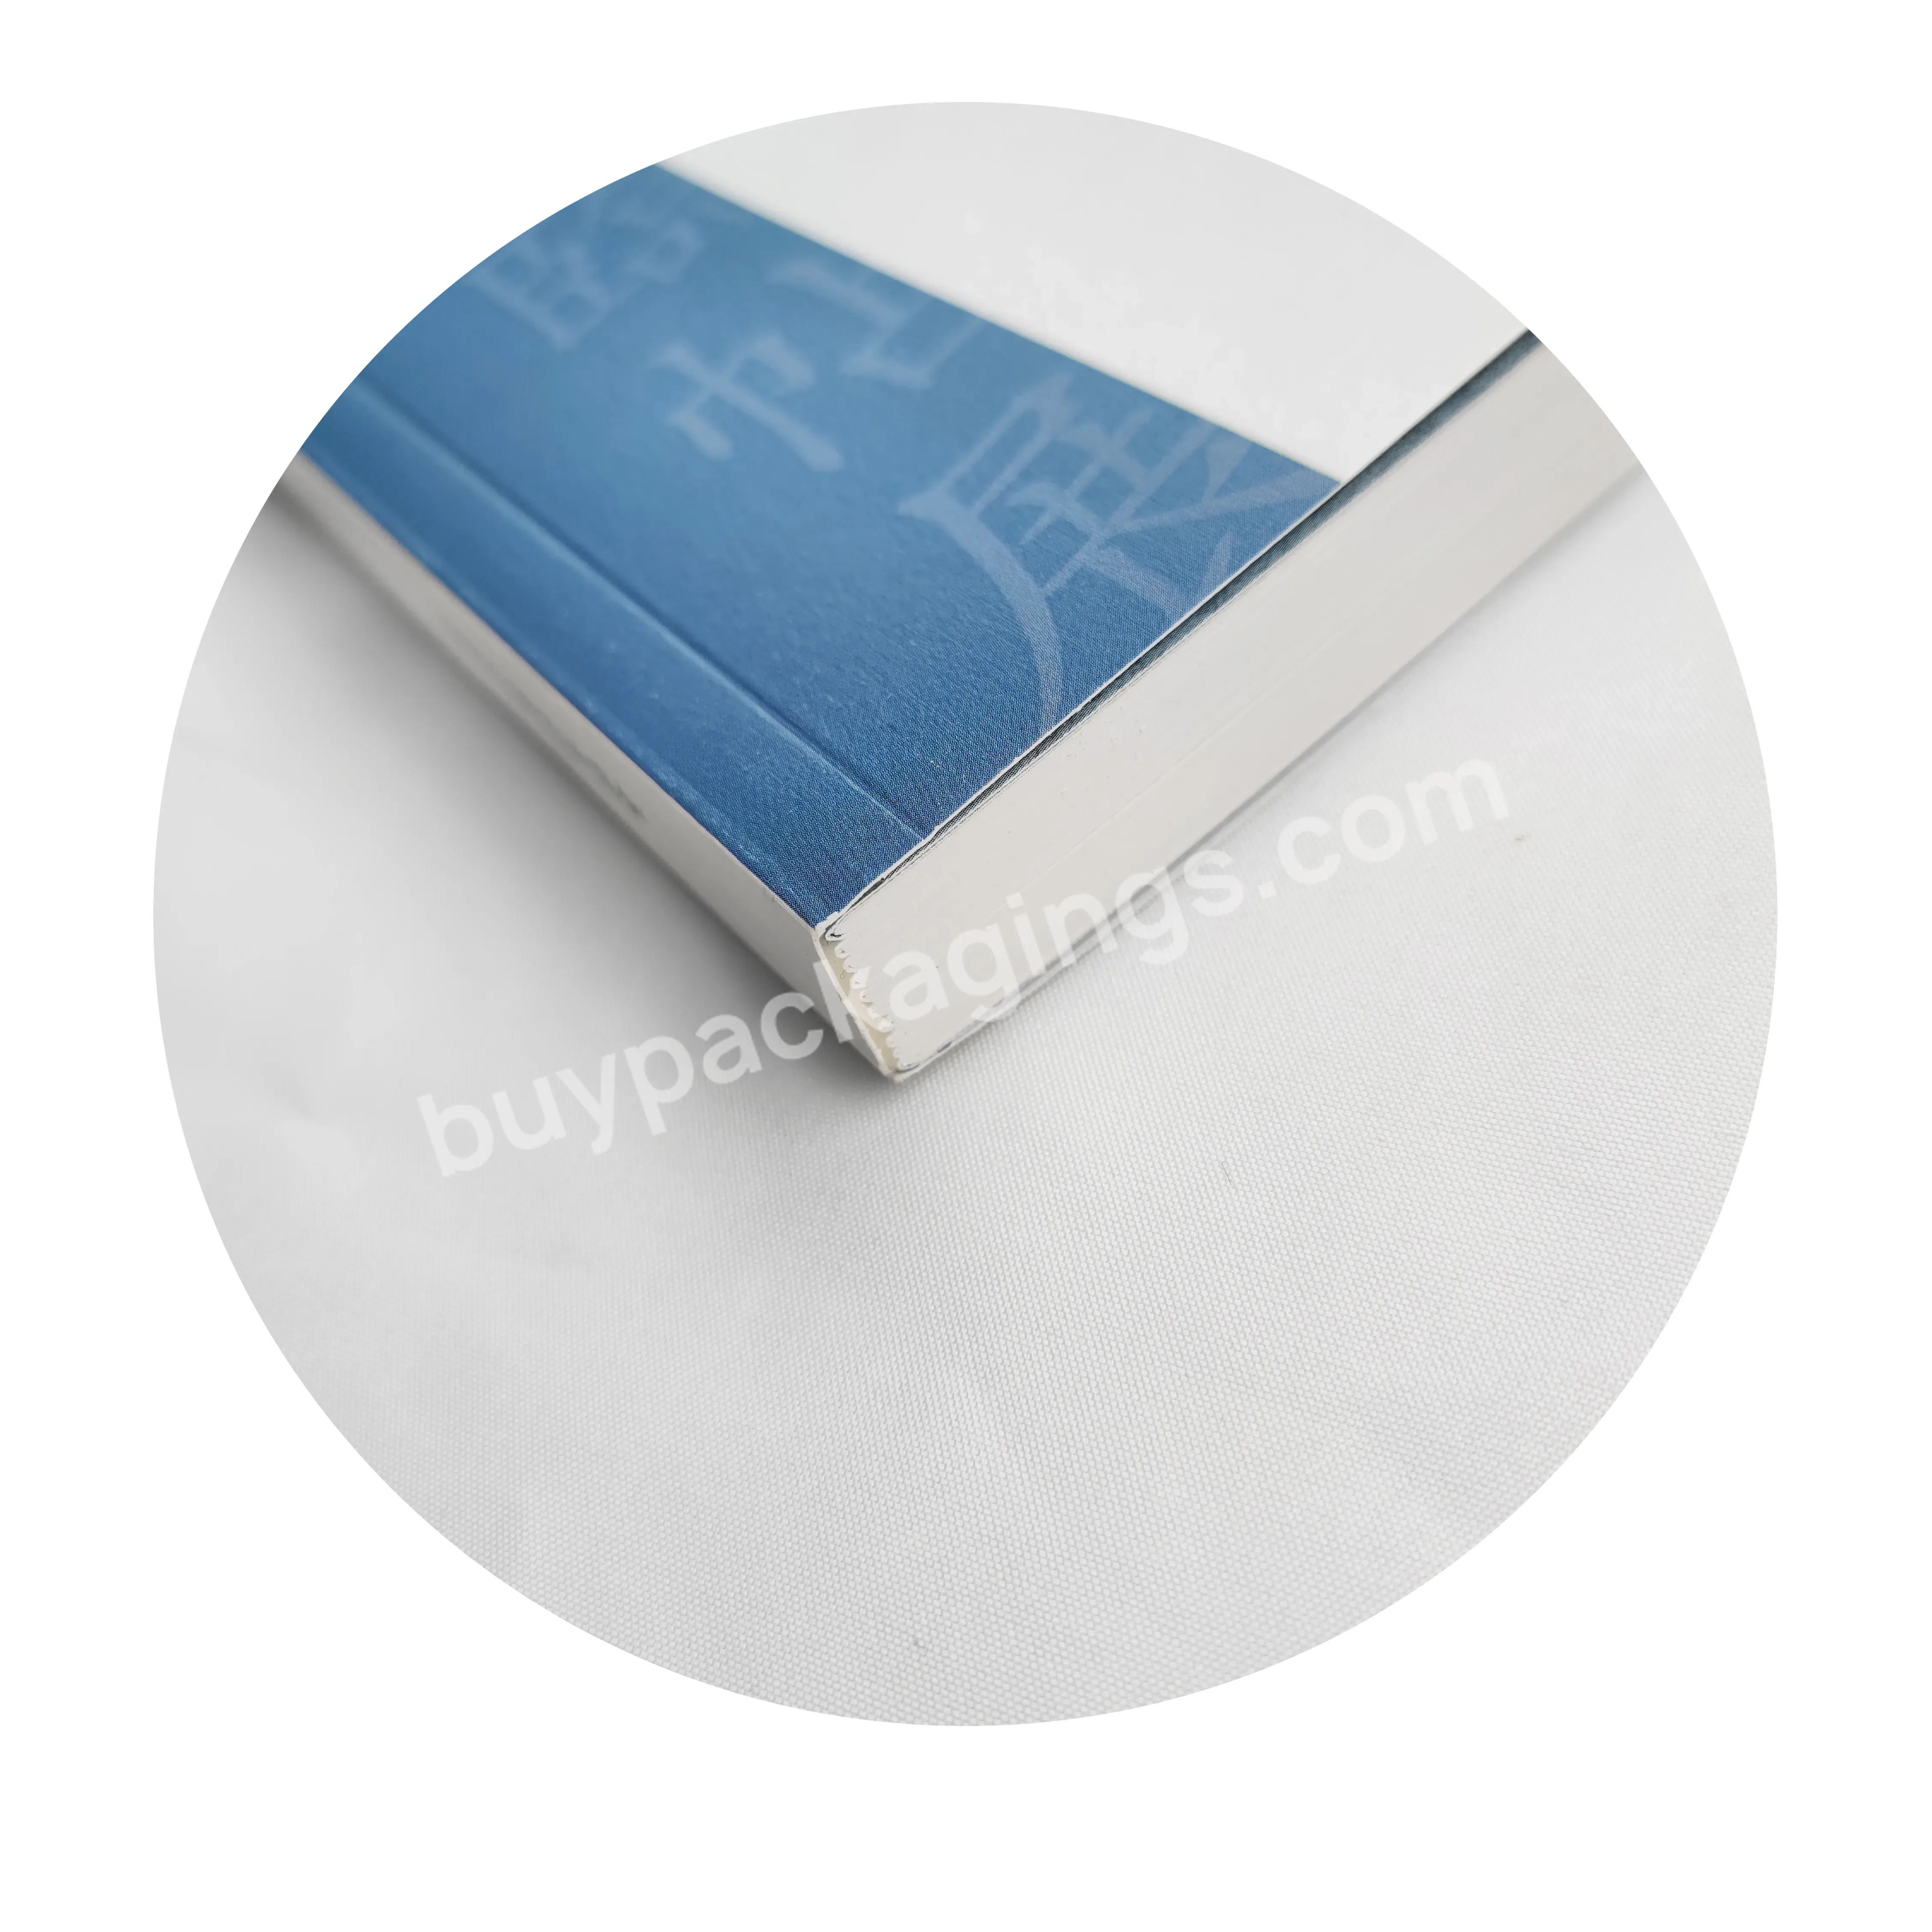 Print Your Own Books China Printing Softcover Book